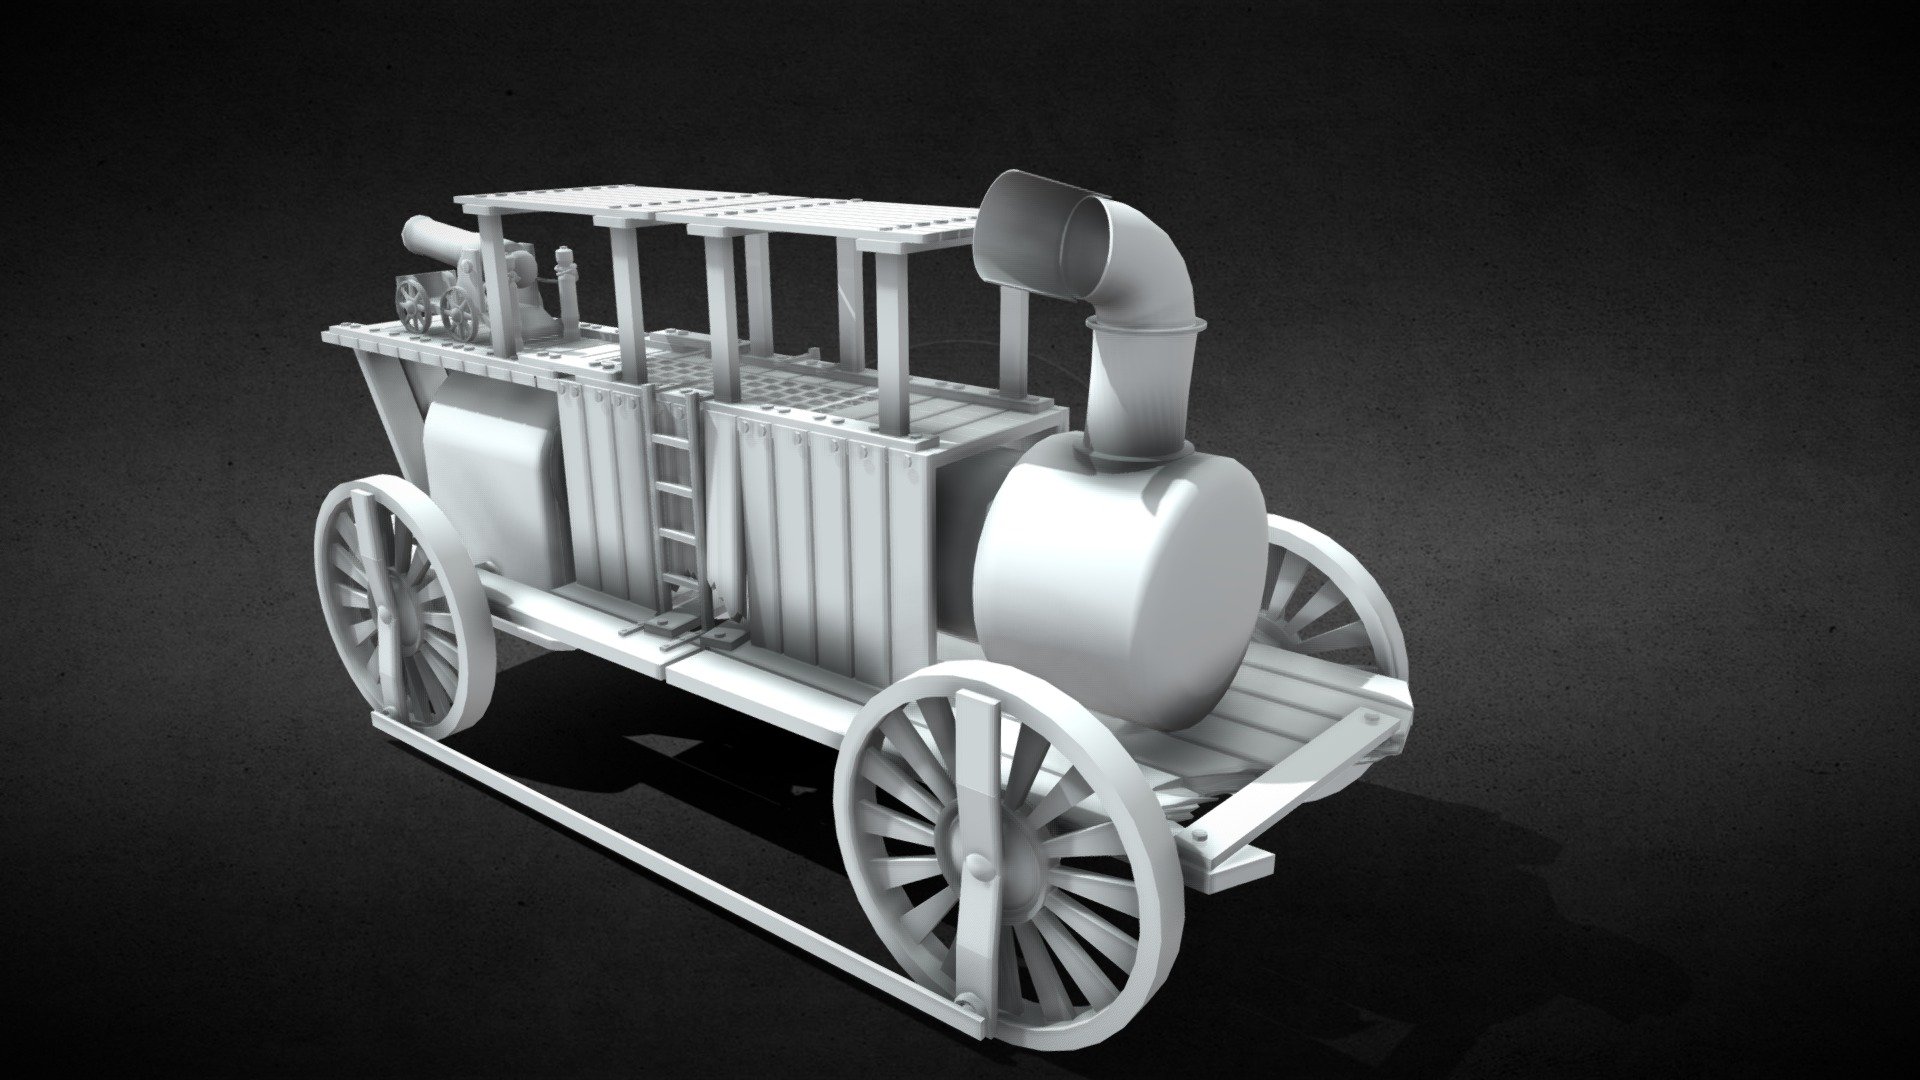 A steam powered western wagon. Likely put together by an engineer and the western era.

No textures 3d model